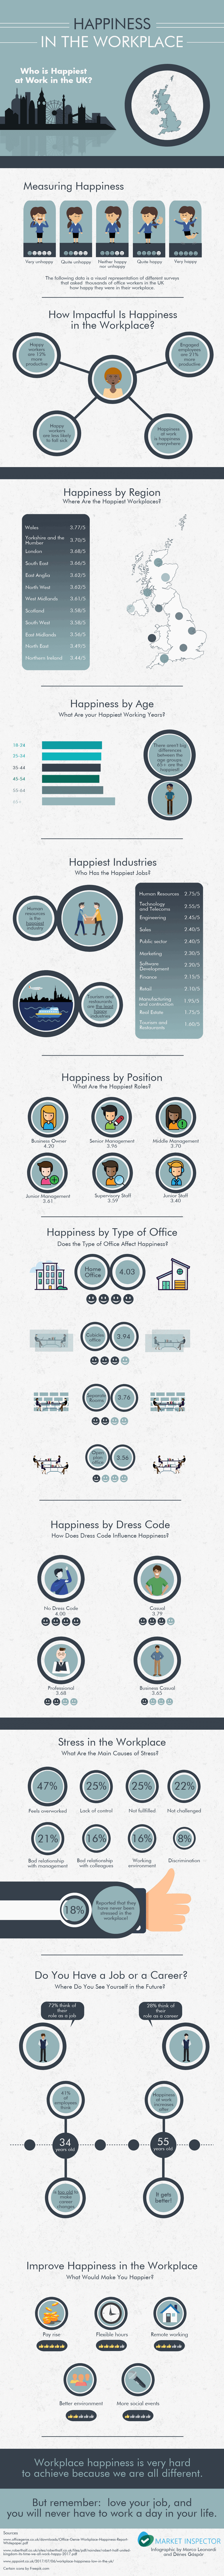 Happiness in the Workplace in the UK